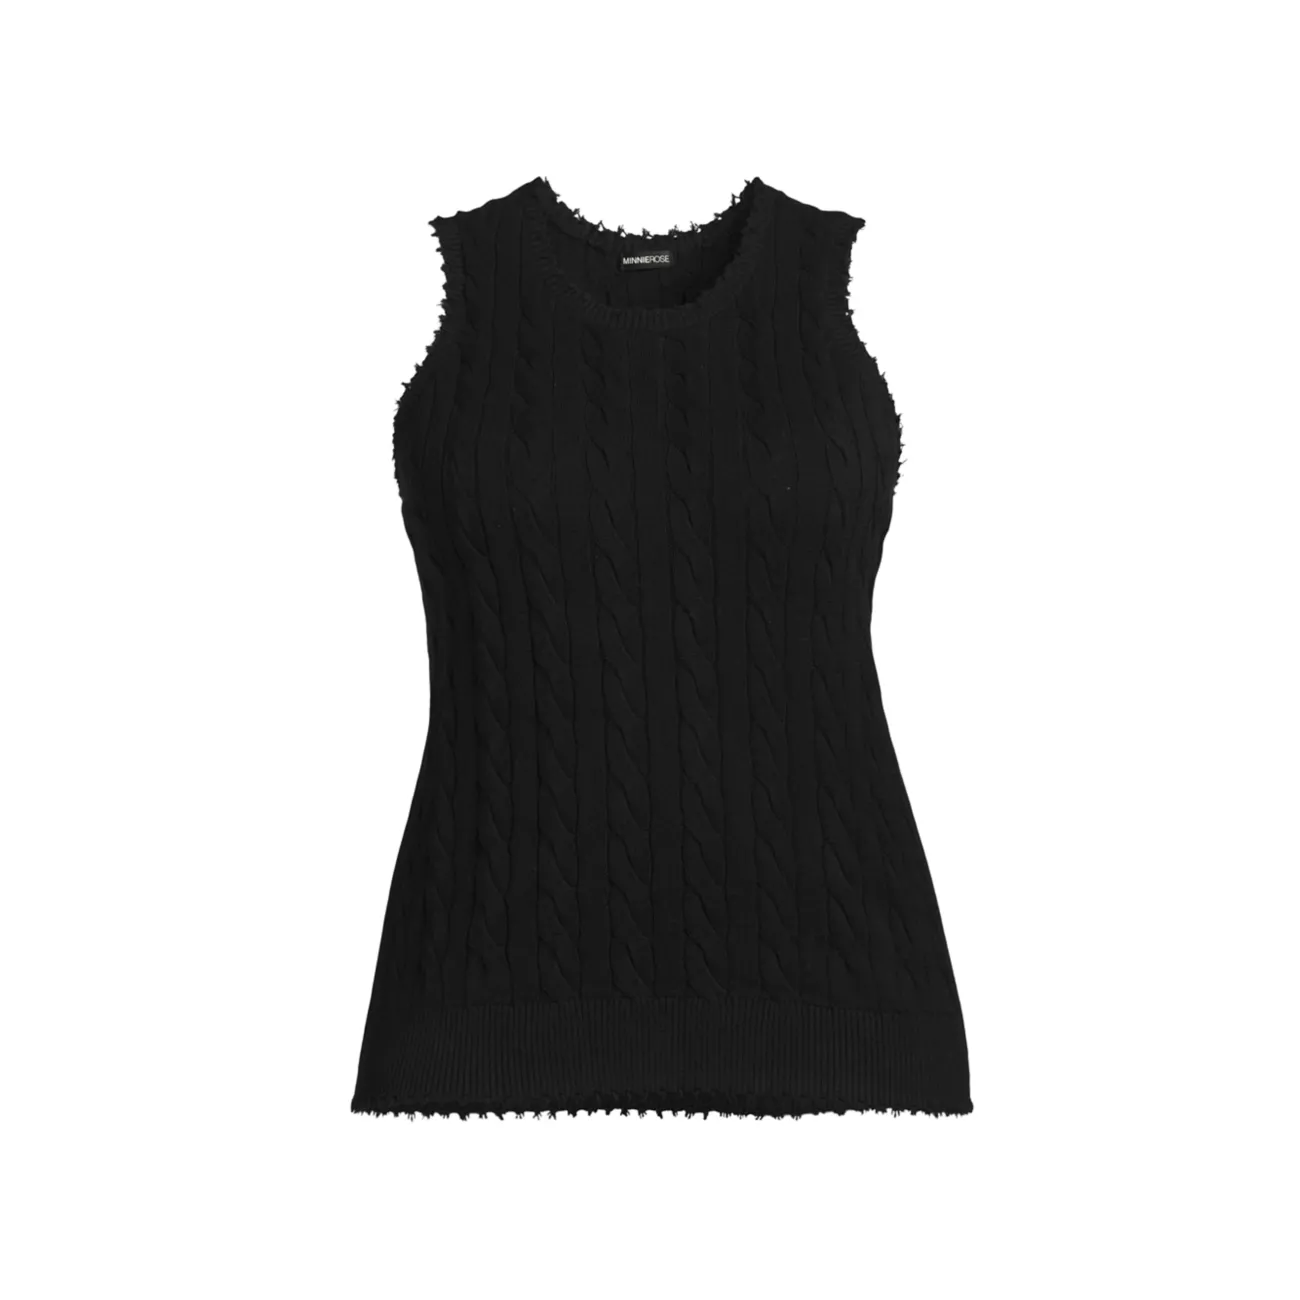 Frayed Cable-Knit Sleeveless Top Minnie Rose, Plus Size